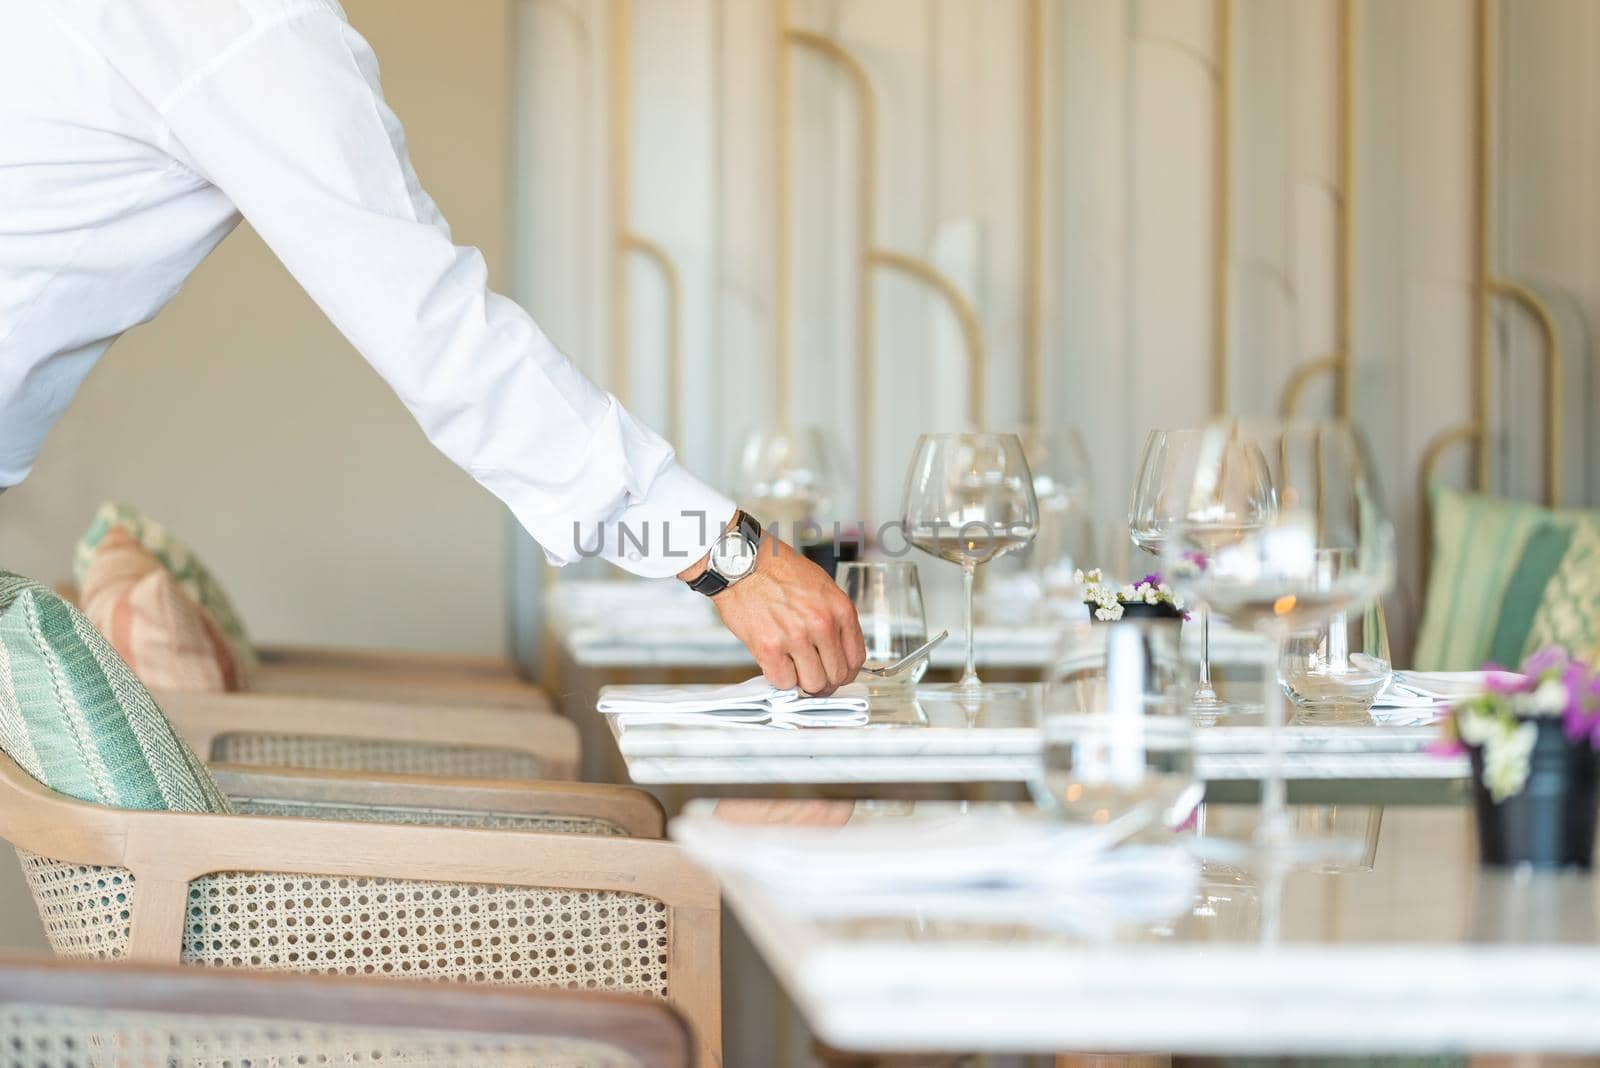 Waiter serving the empty table of the luxury restaurant by Sonat